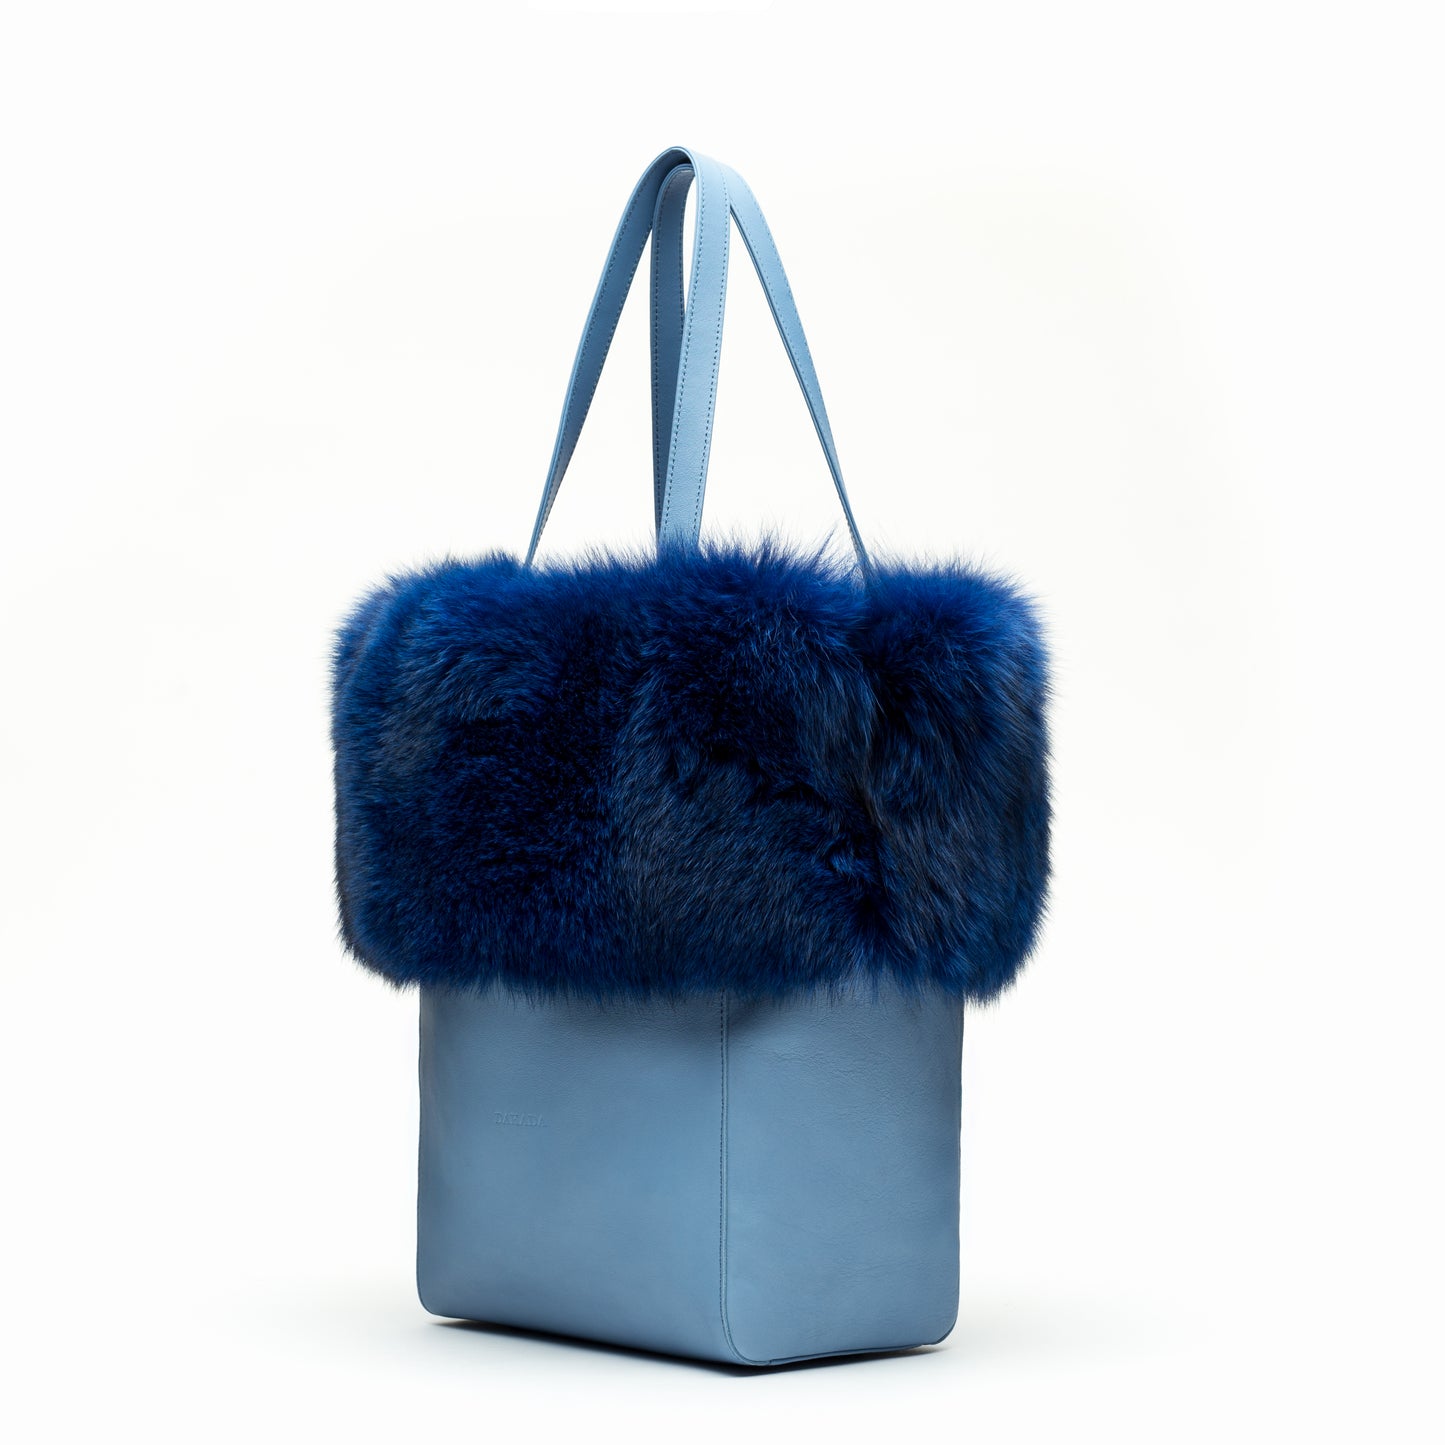 Kaley- Light Blue Leather Tote with Dyed Blue Fox